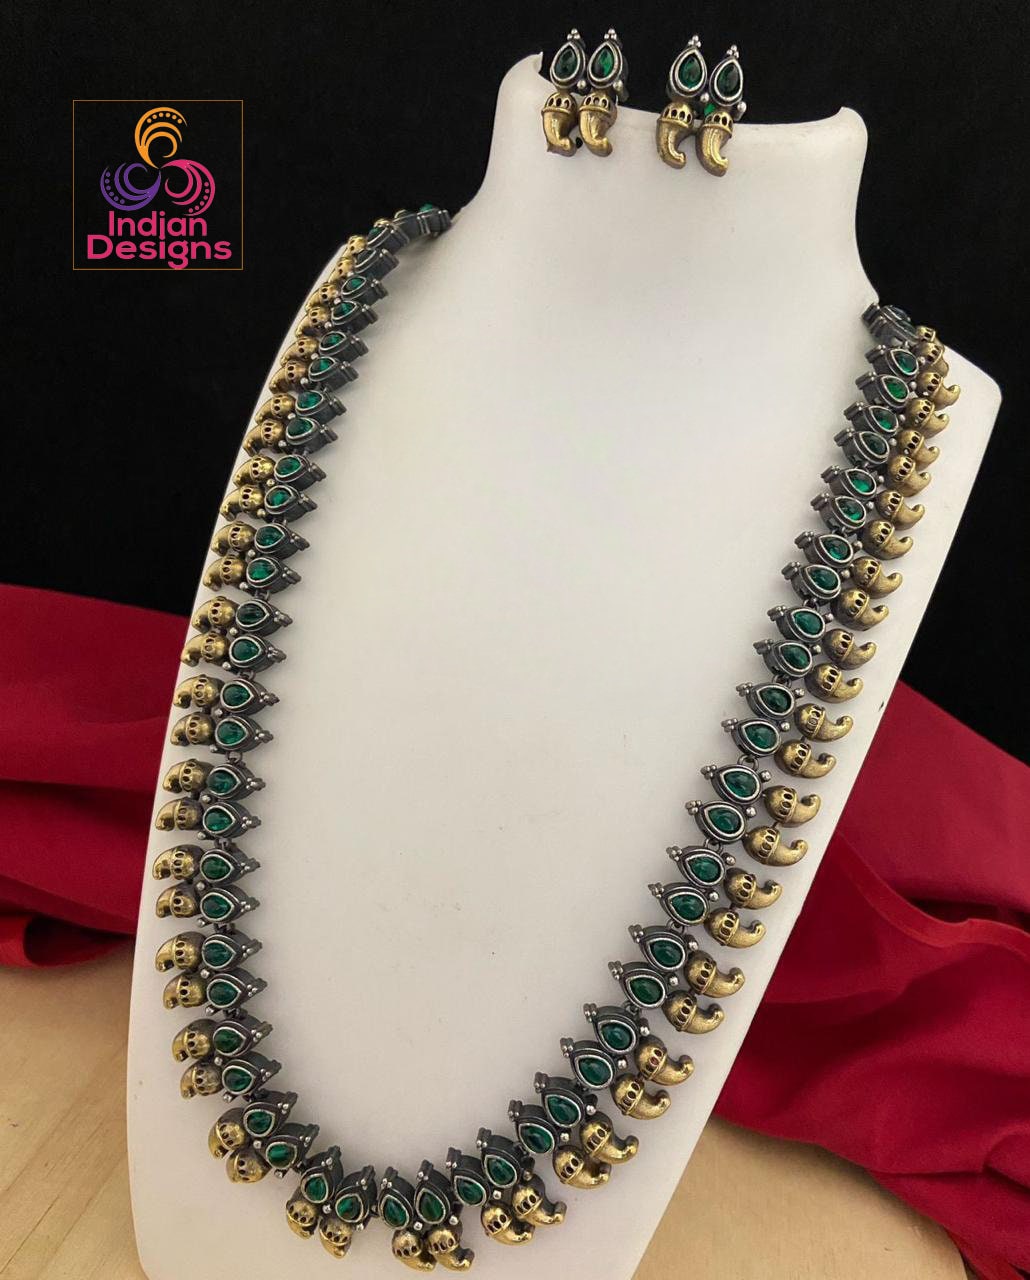 Emerald beads necklace with peacock side pendant - Indian Jewellery Designs